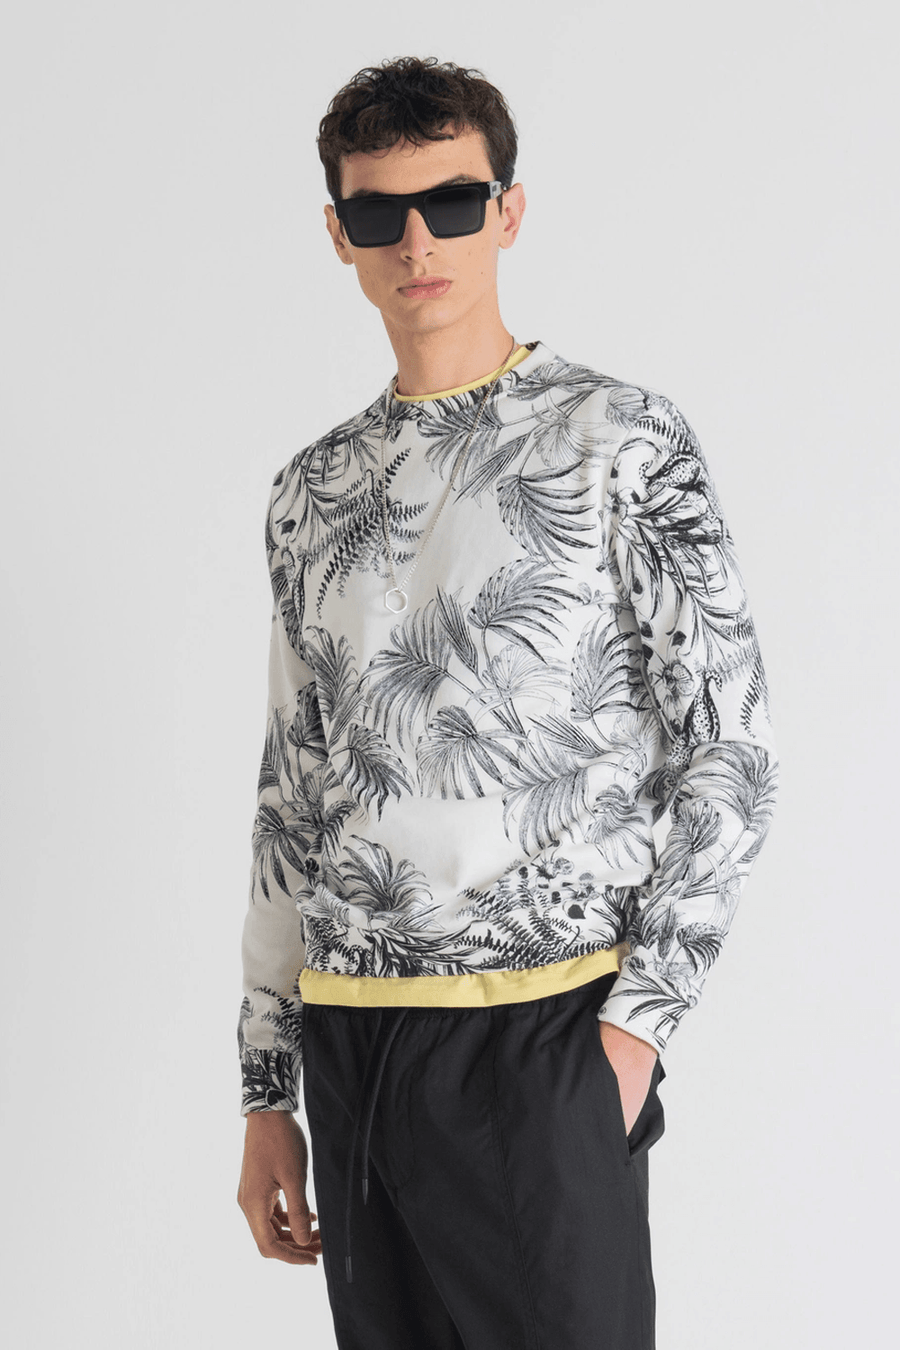 Buy the Antony Morato Honolulu Monochrome Sweatshirt in Cream at Intro. Spend £50 for free UK delivery. Official stockists. We ship worldwide.